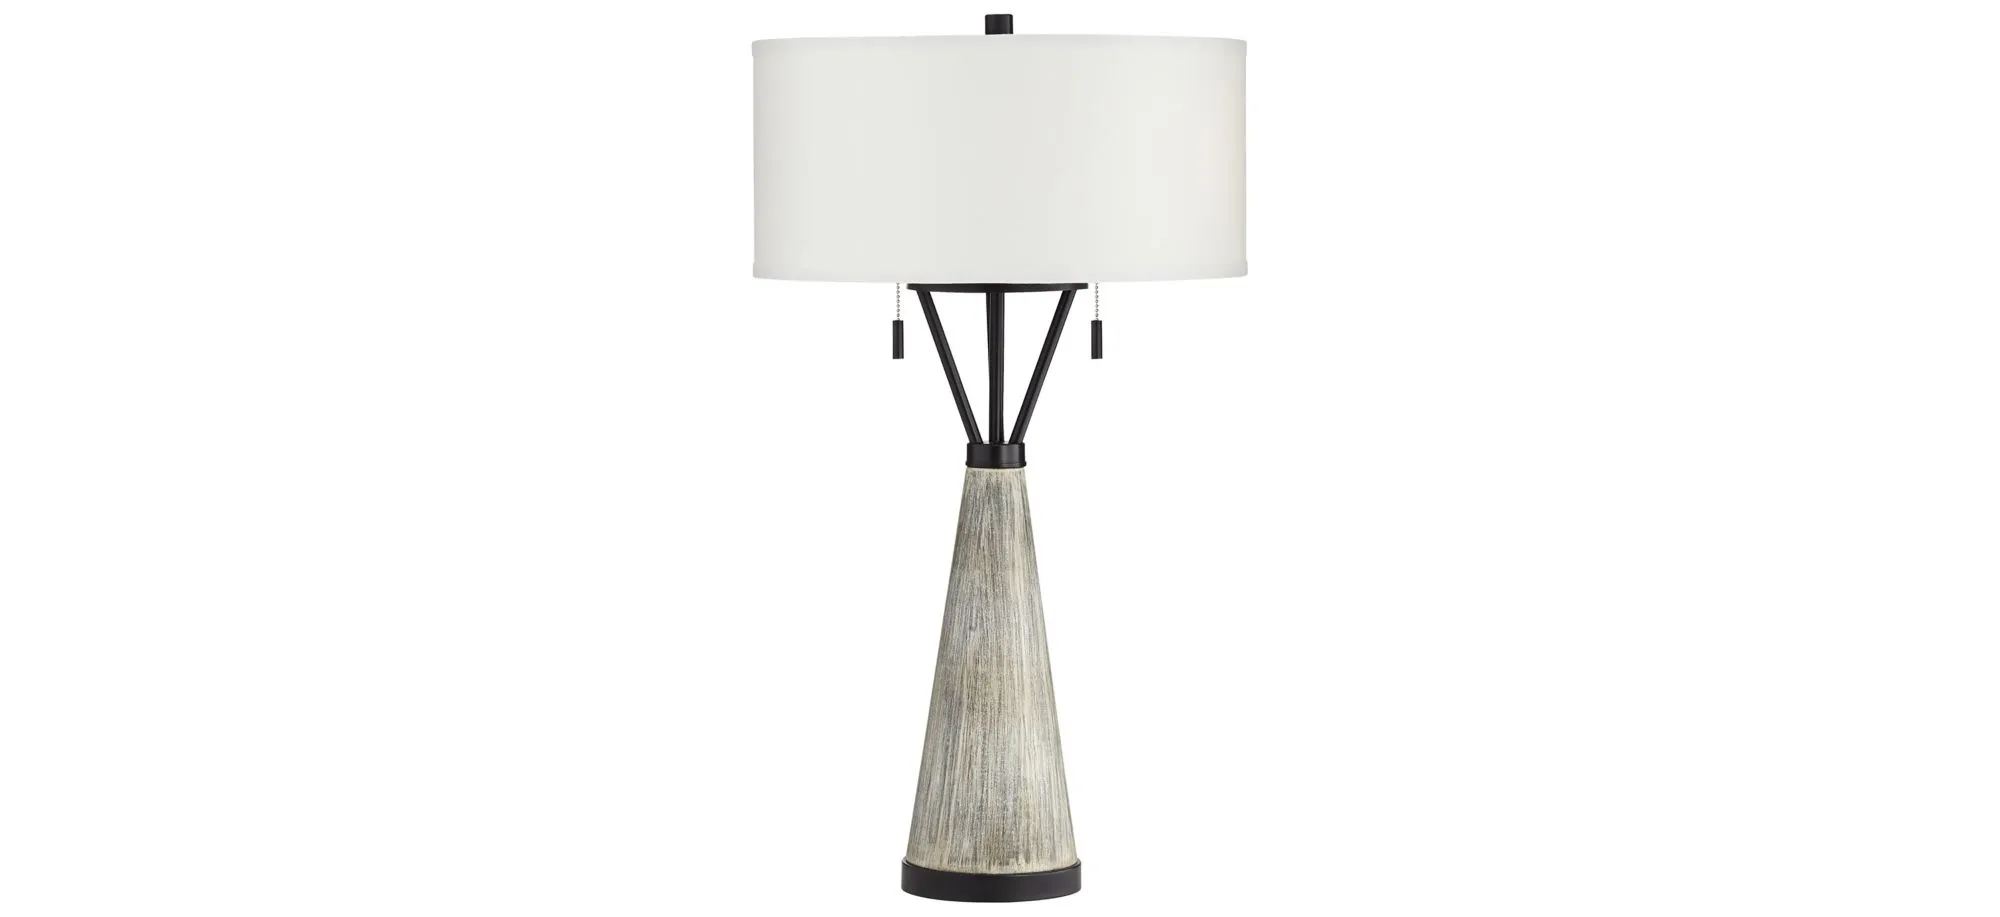 Oakland Table Lamp in Gray Wash by Pacific Coast